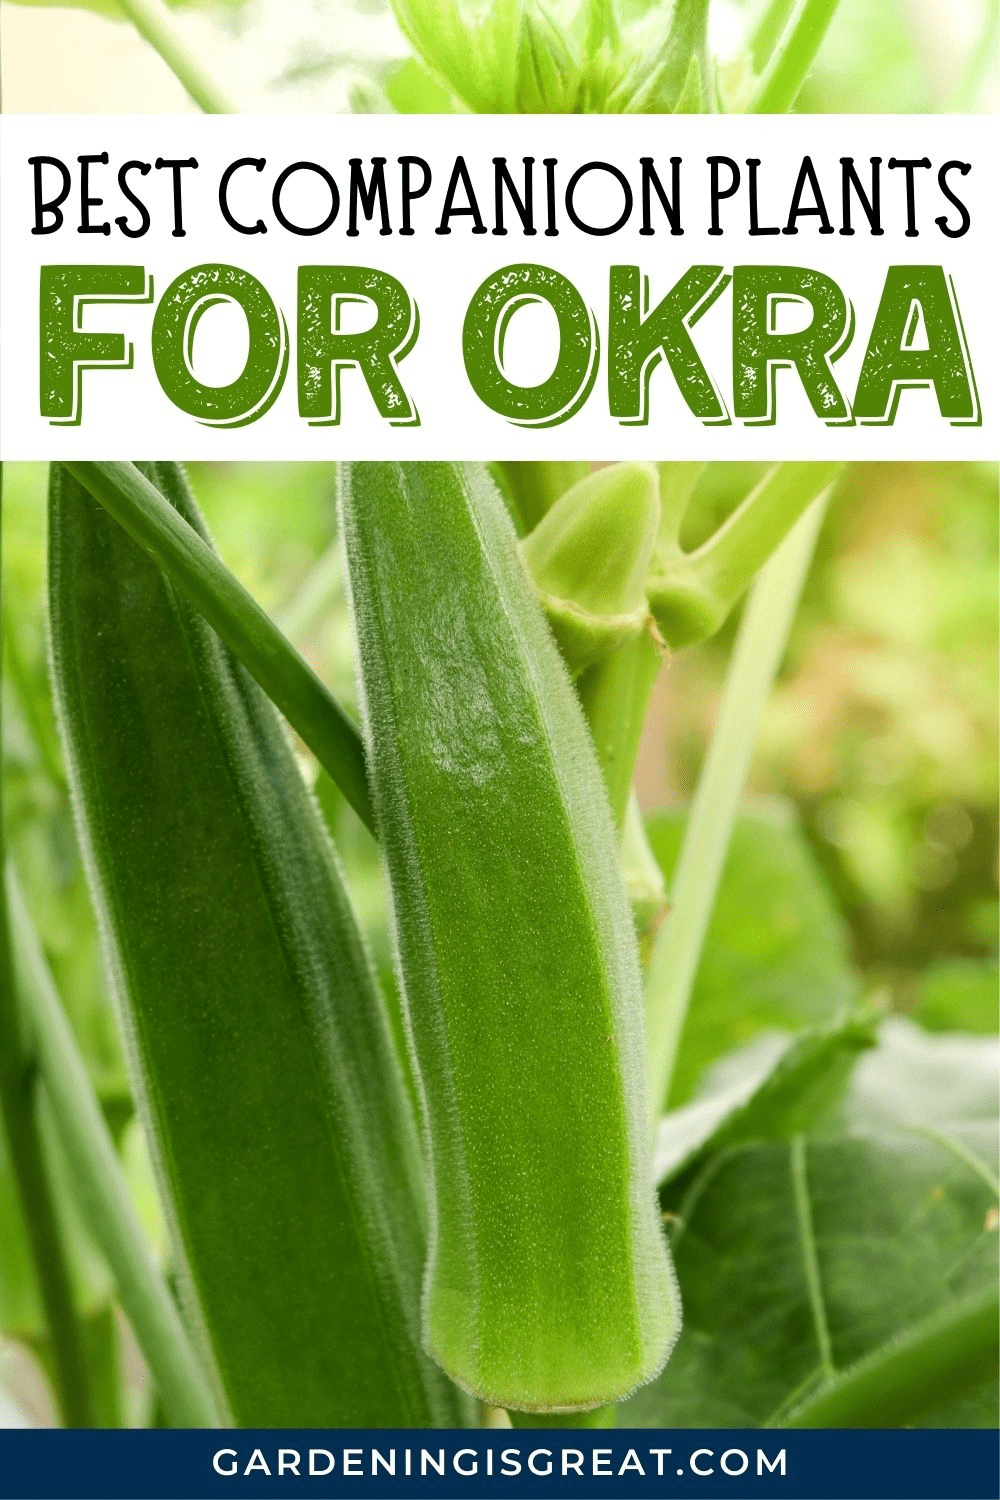 The Best Companion Plants For Okra | Gardening is Great